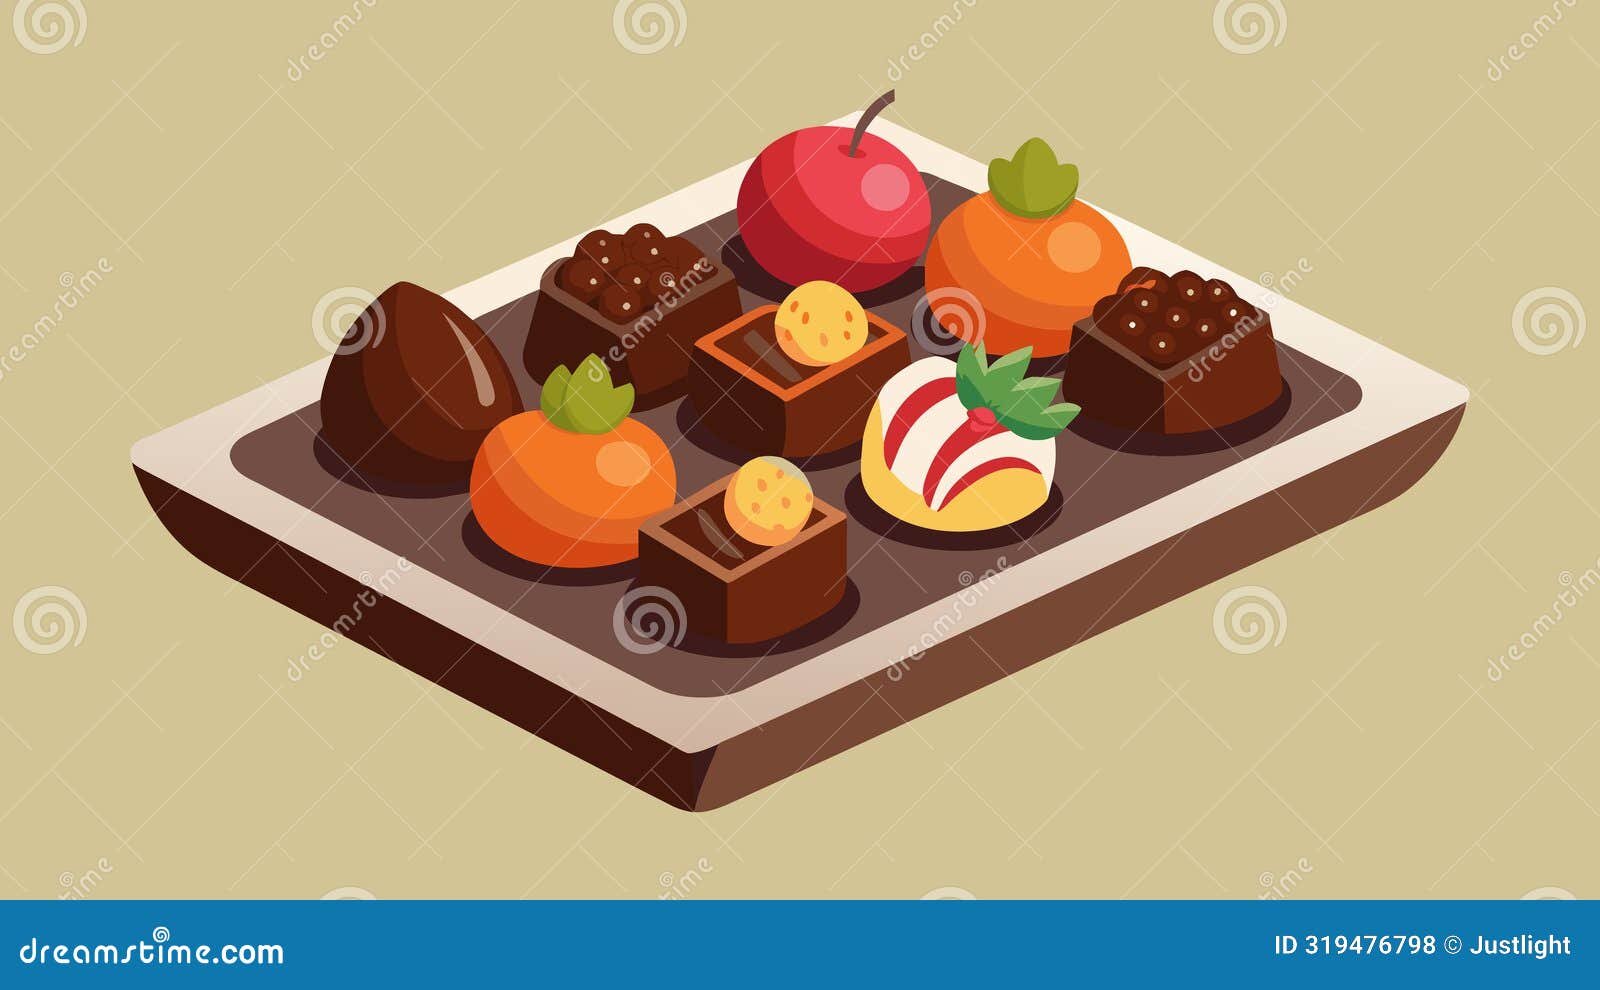 a tray of sumptuous chocolatecovered fruits and nuts glistening with a fine layer of sugar for added decadence in a